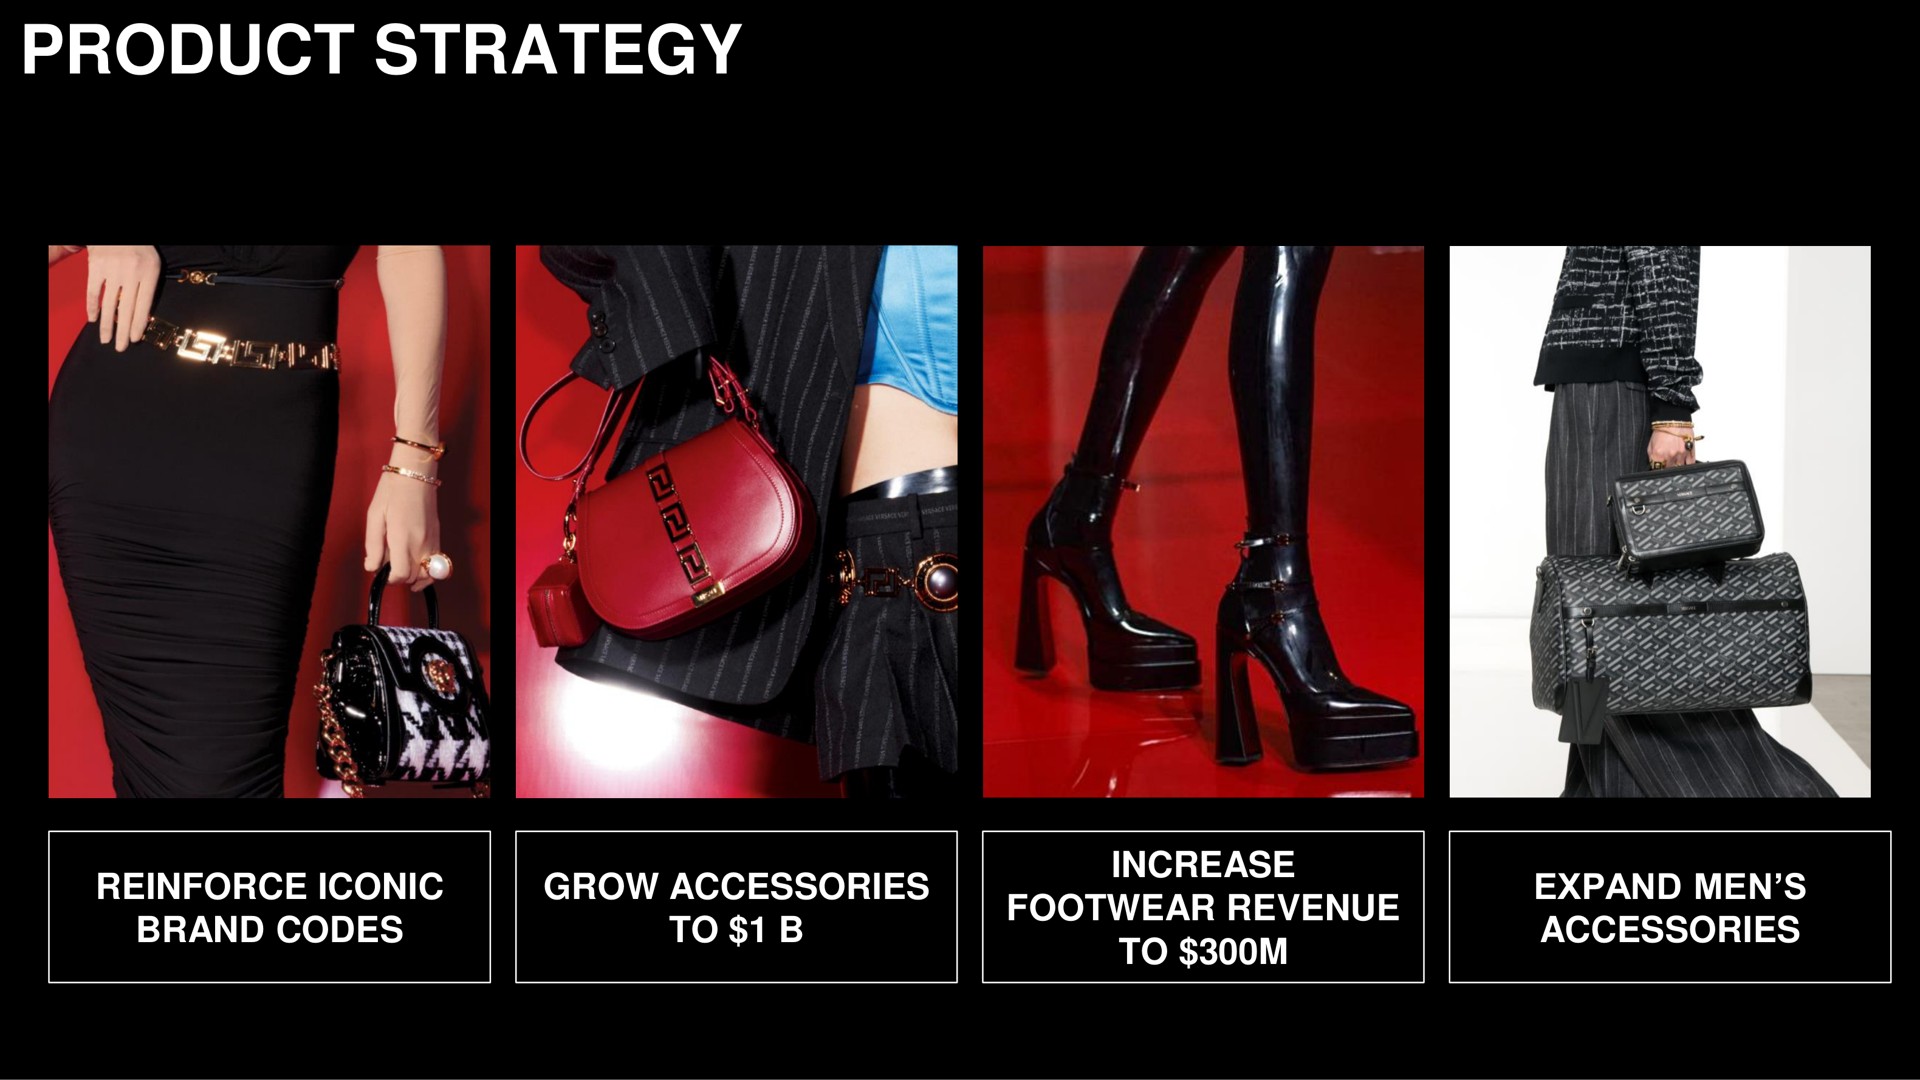 product strategy i aunt reinforce iconic grow accessories to expand men accessories brand codes to | Capri Holdings